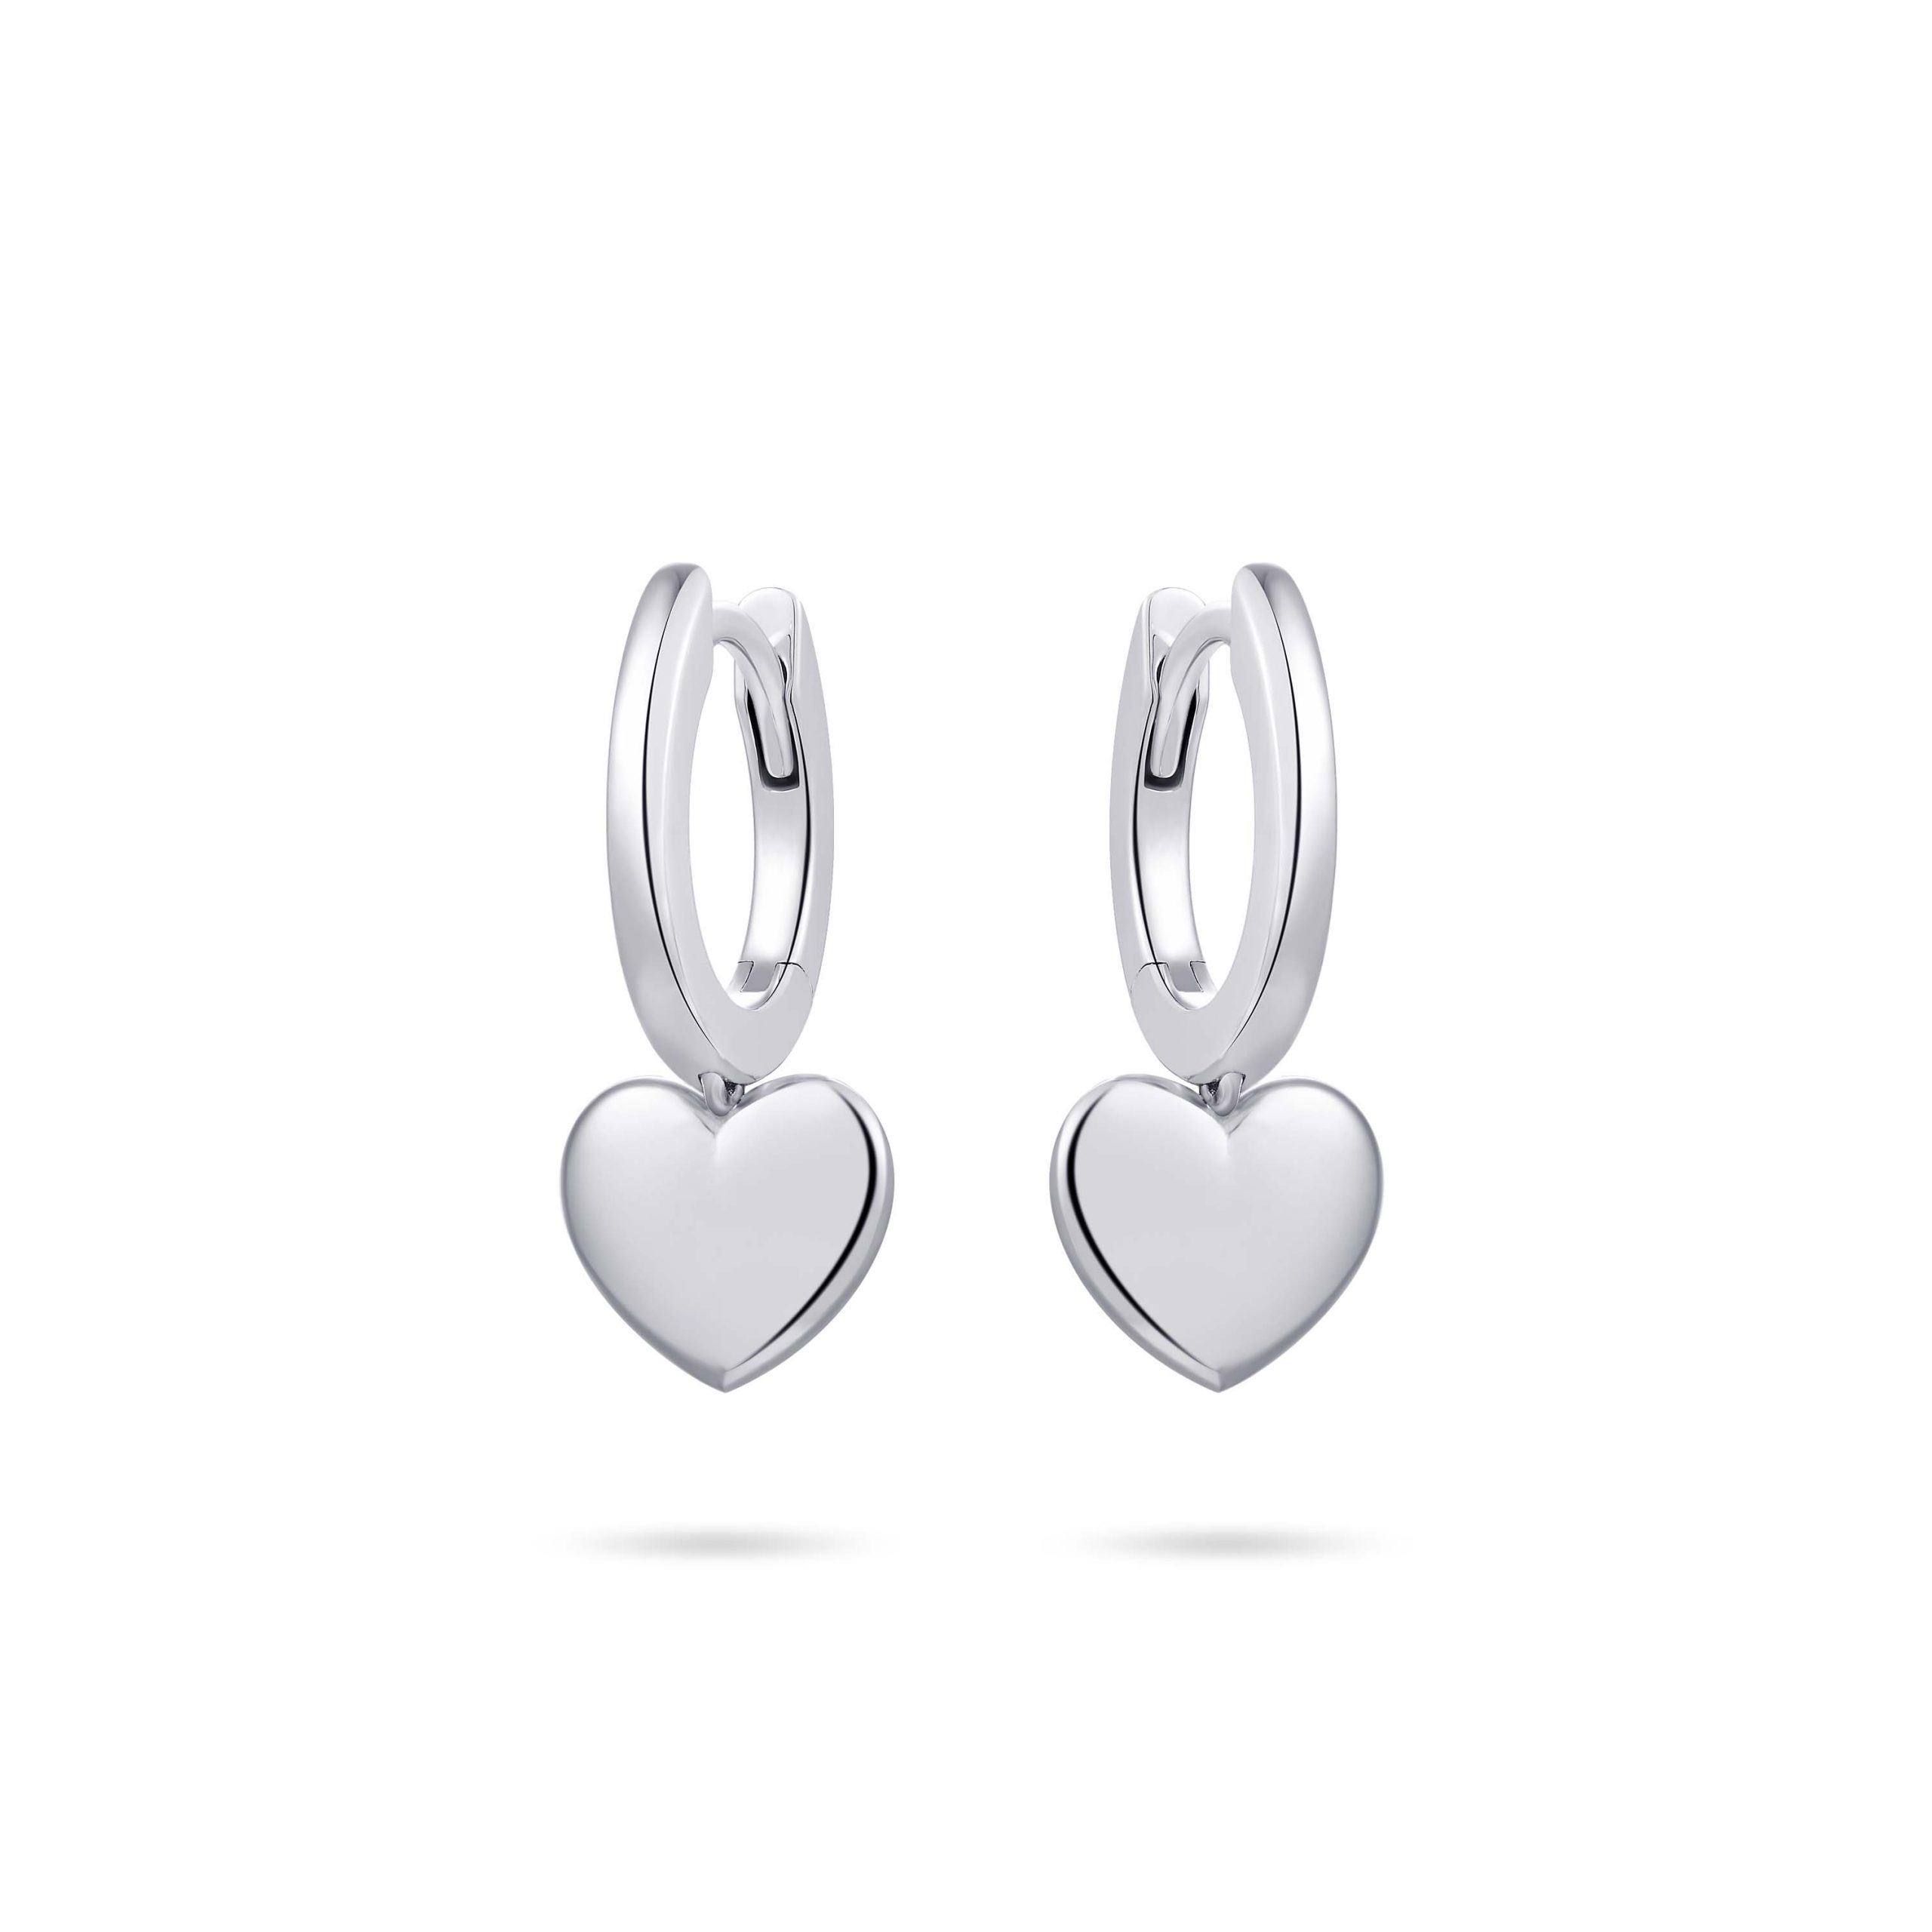 Gisser Hoops with Heart - Gisser - Fallers.ie - Fallers Jewellers Galway